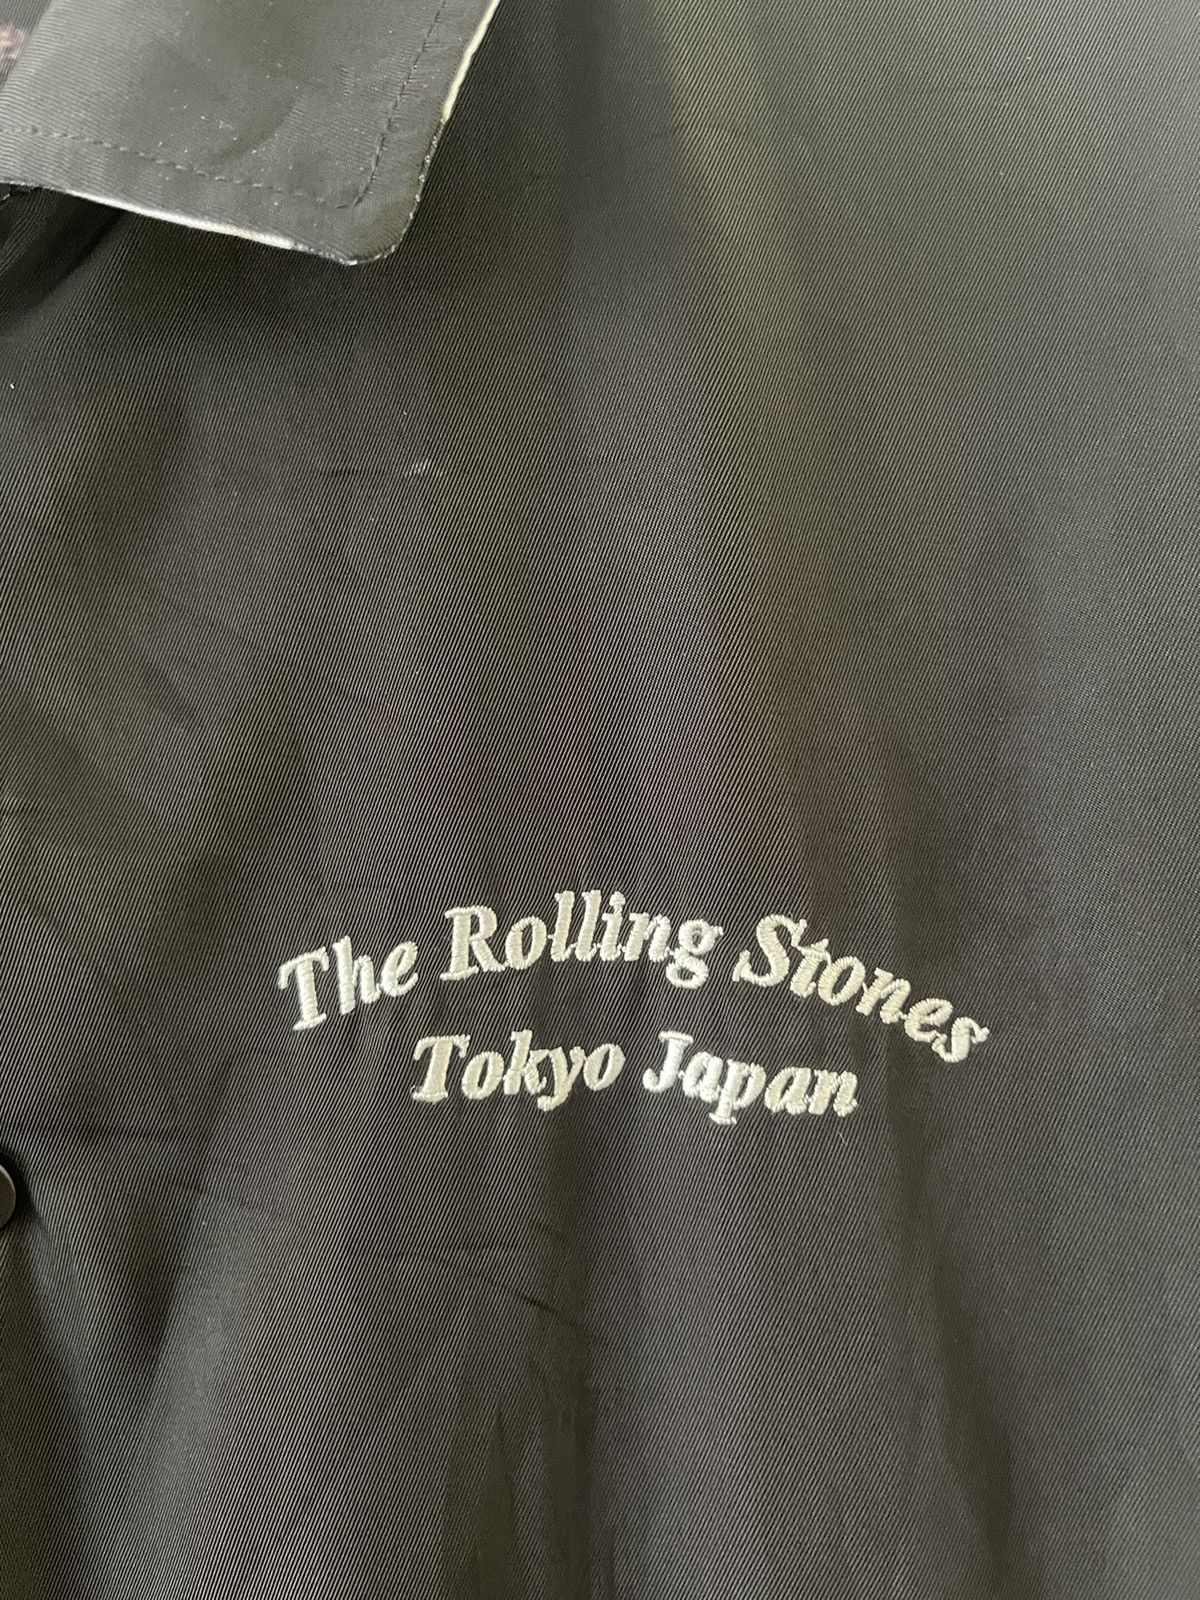 The Rolling Stone By Jack Rose Reversible Jacket - 9